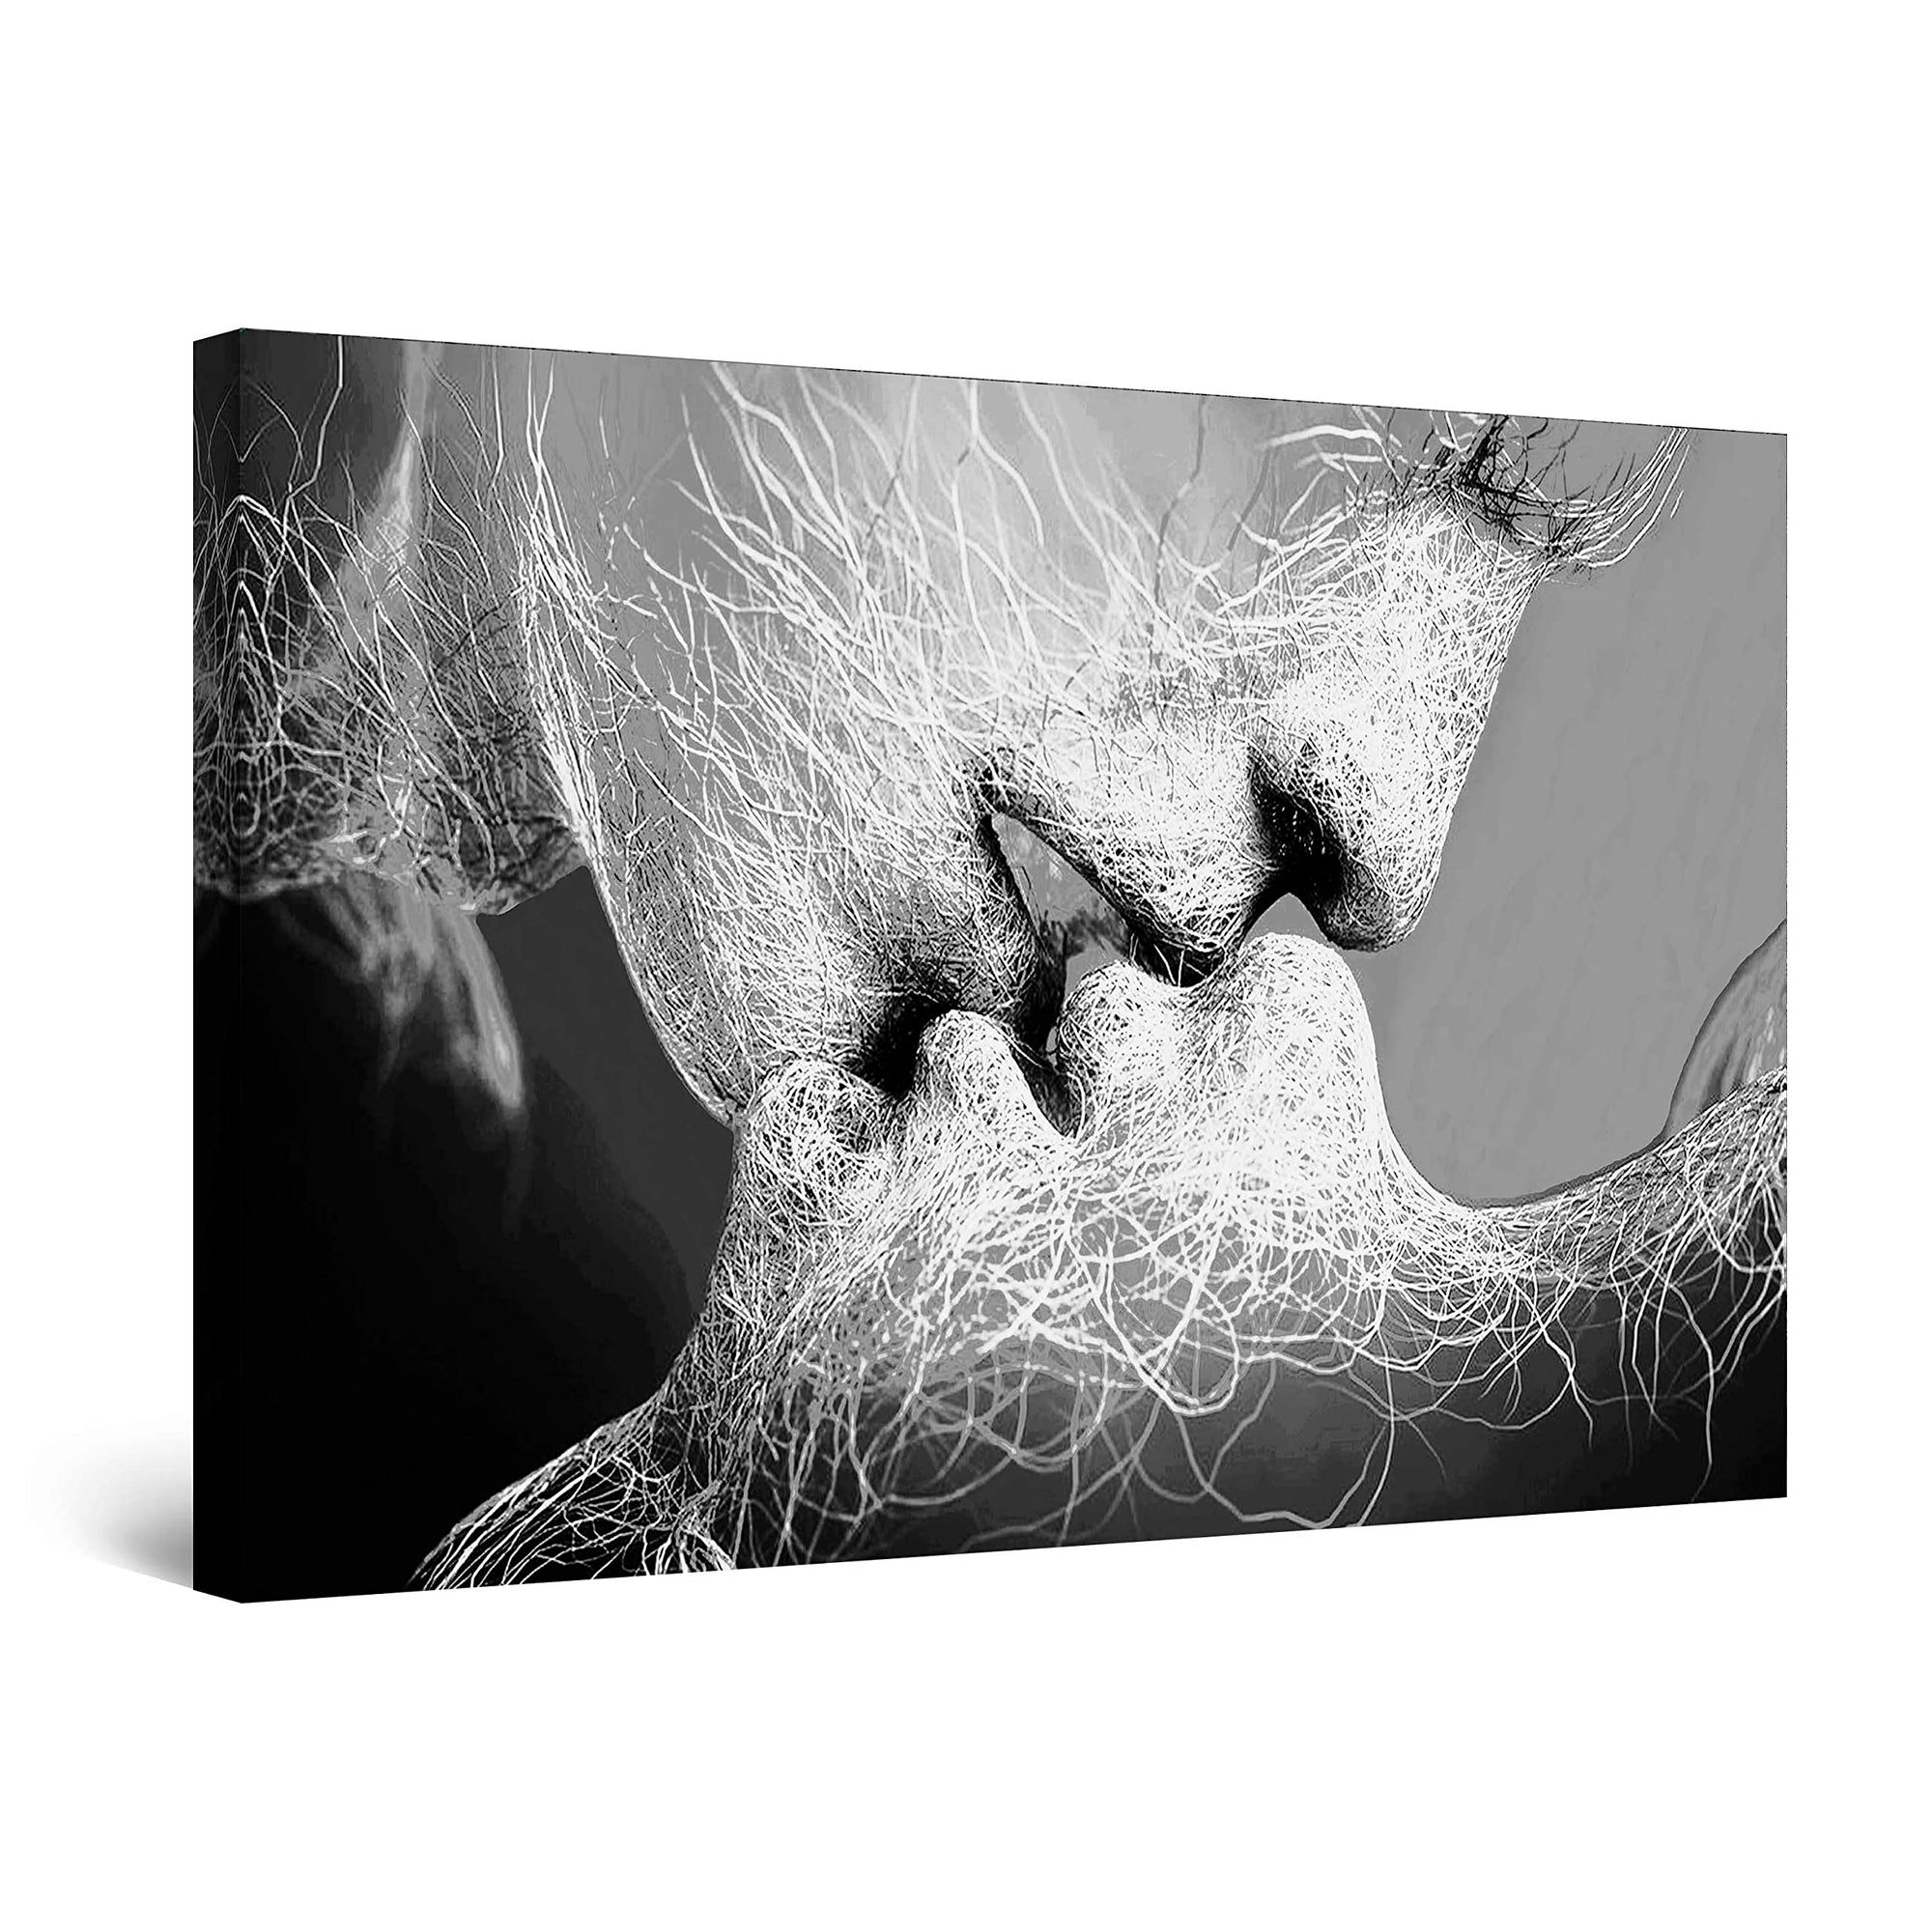 Startonight Canvas Wall Art Black and White Abstract Couple Adam and Eve, Framed Quantic Home Decor for Living Room 32" x 48"